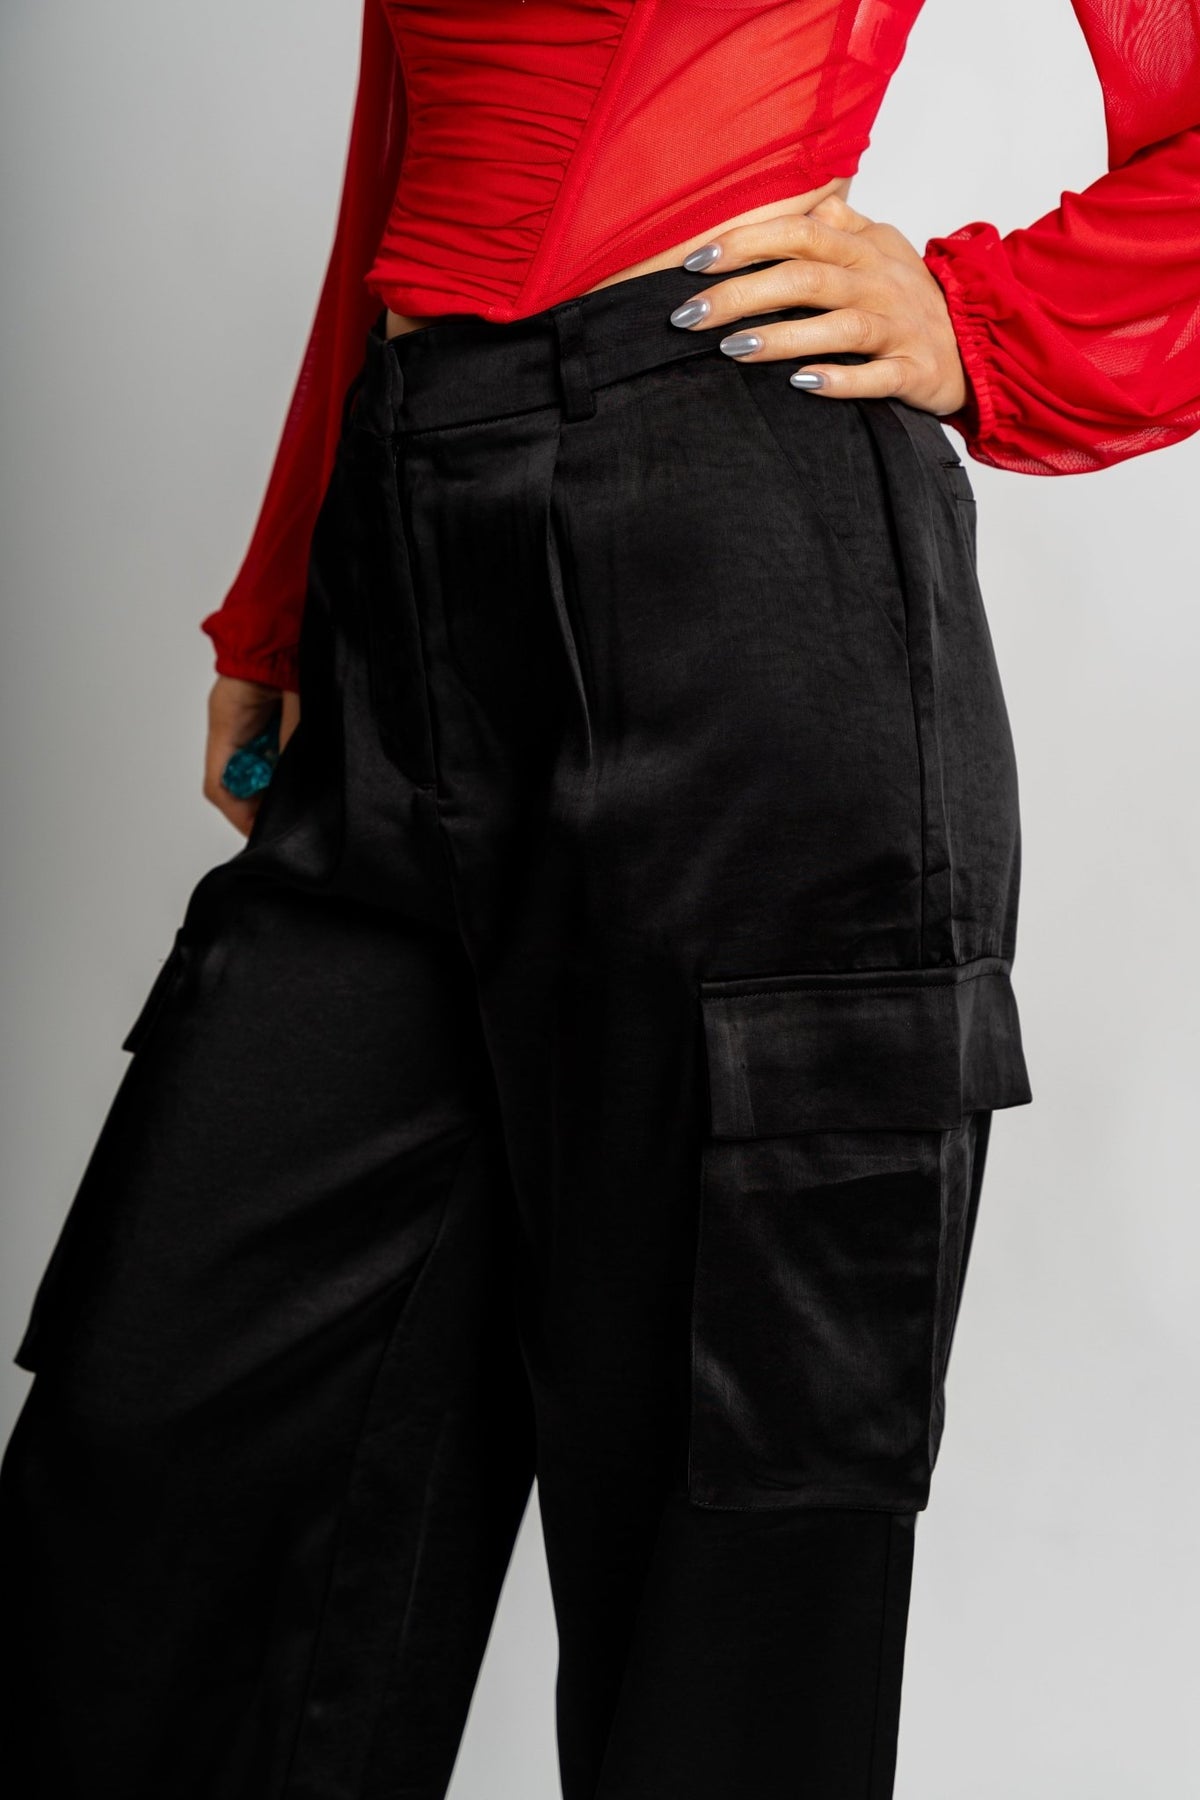 Myra satin cargo pants black - Trendy T-Shirts for Valentine's Day at Lush Fashion Lounge Boutique in Oklahoma City